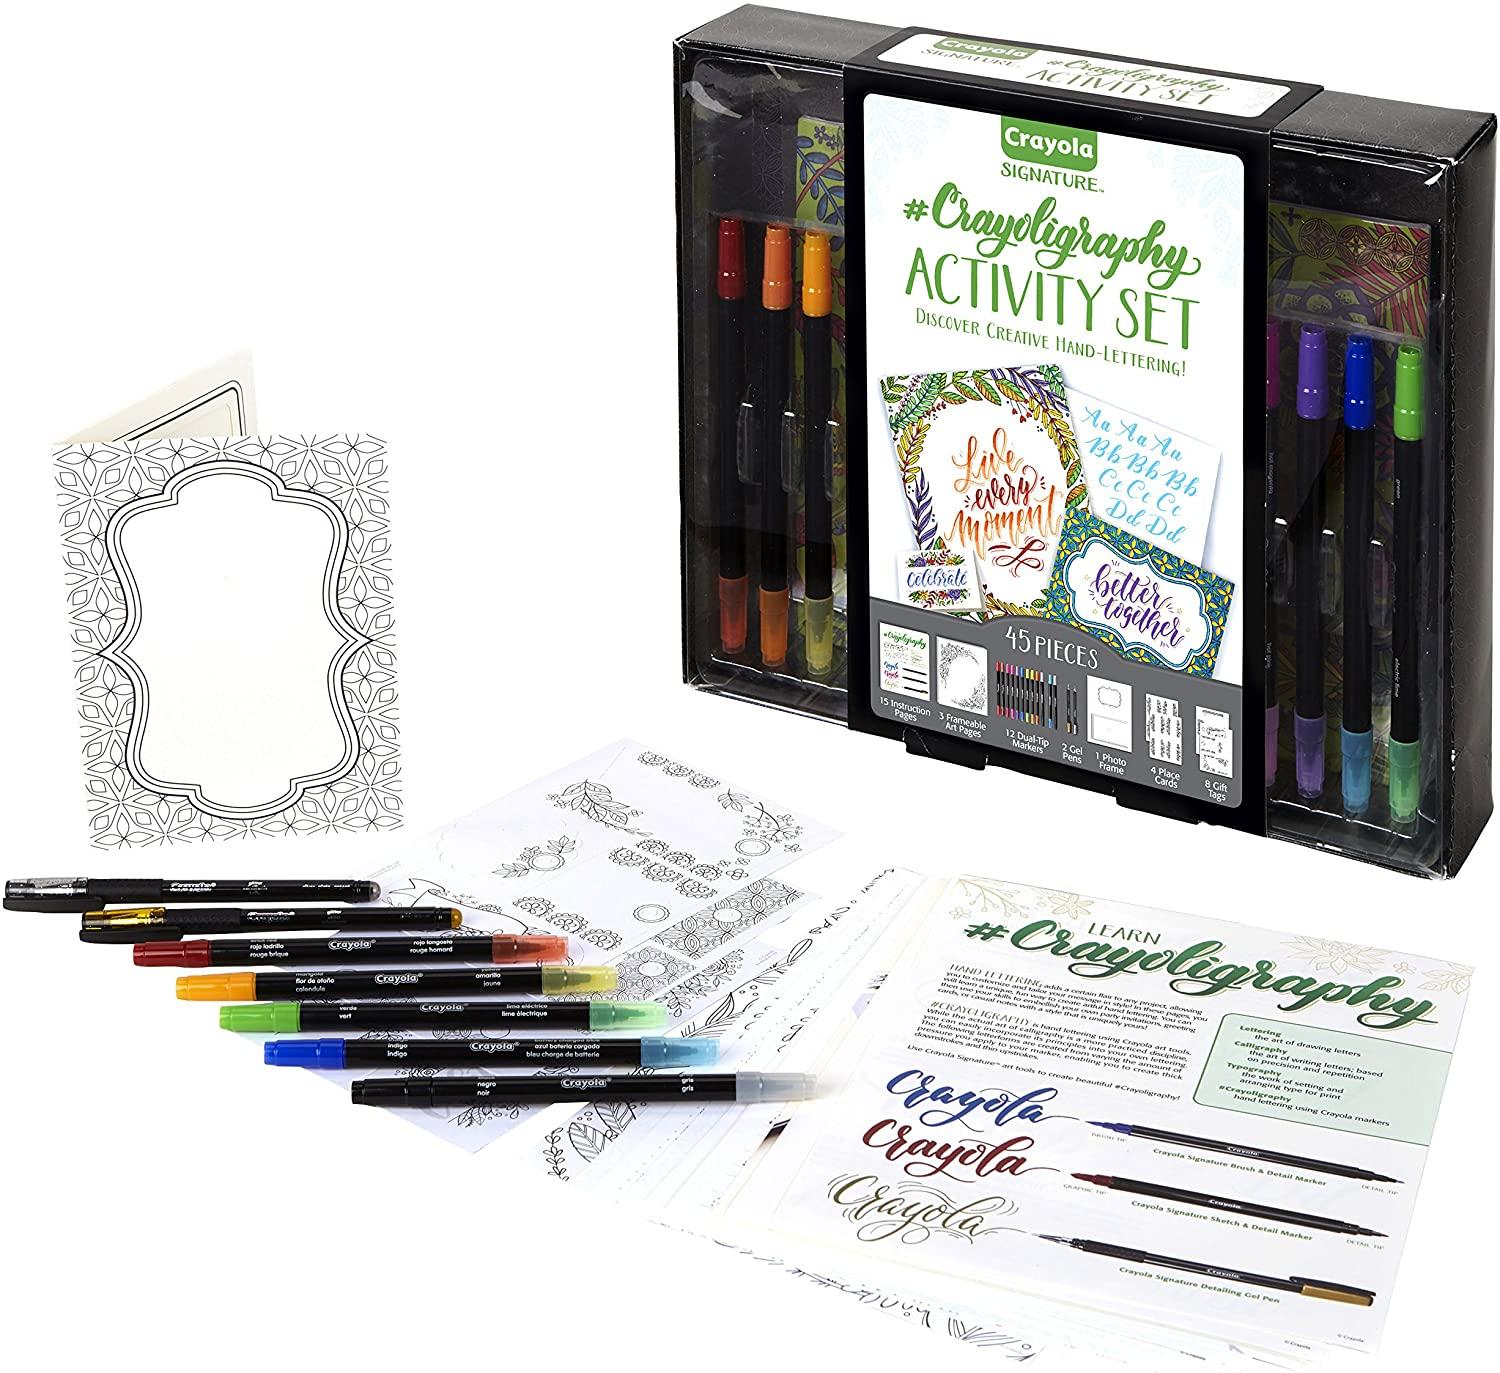 45-Piece Crayola Signature Crayoligraphy Hand Lettering Art Set for $8.24